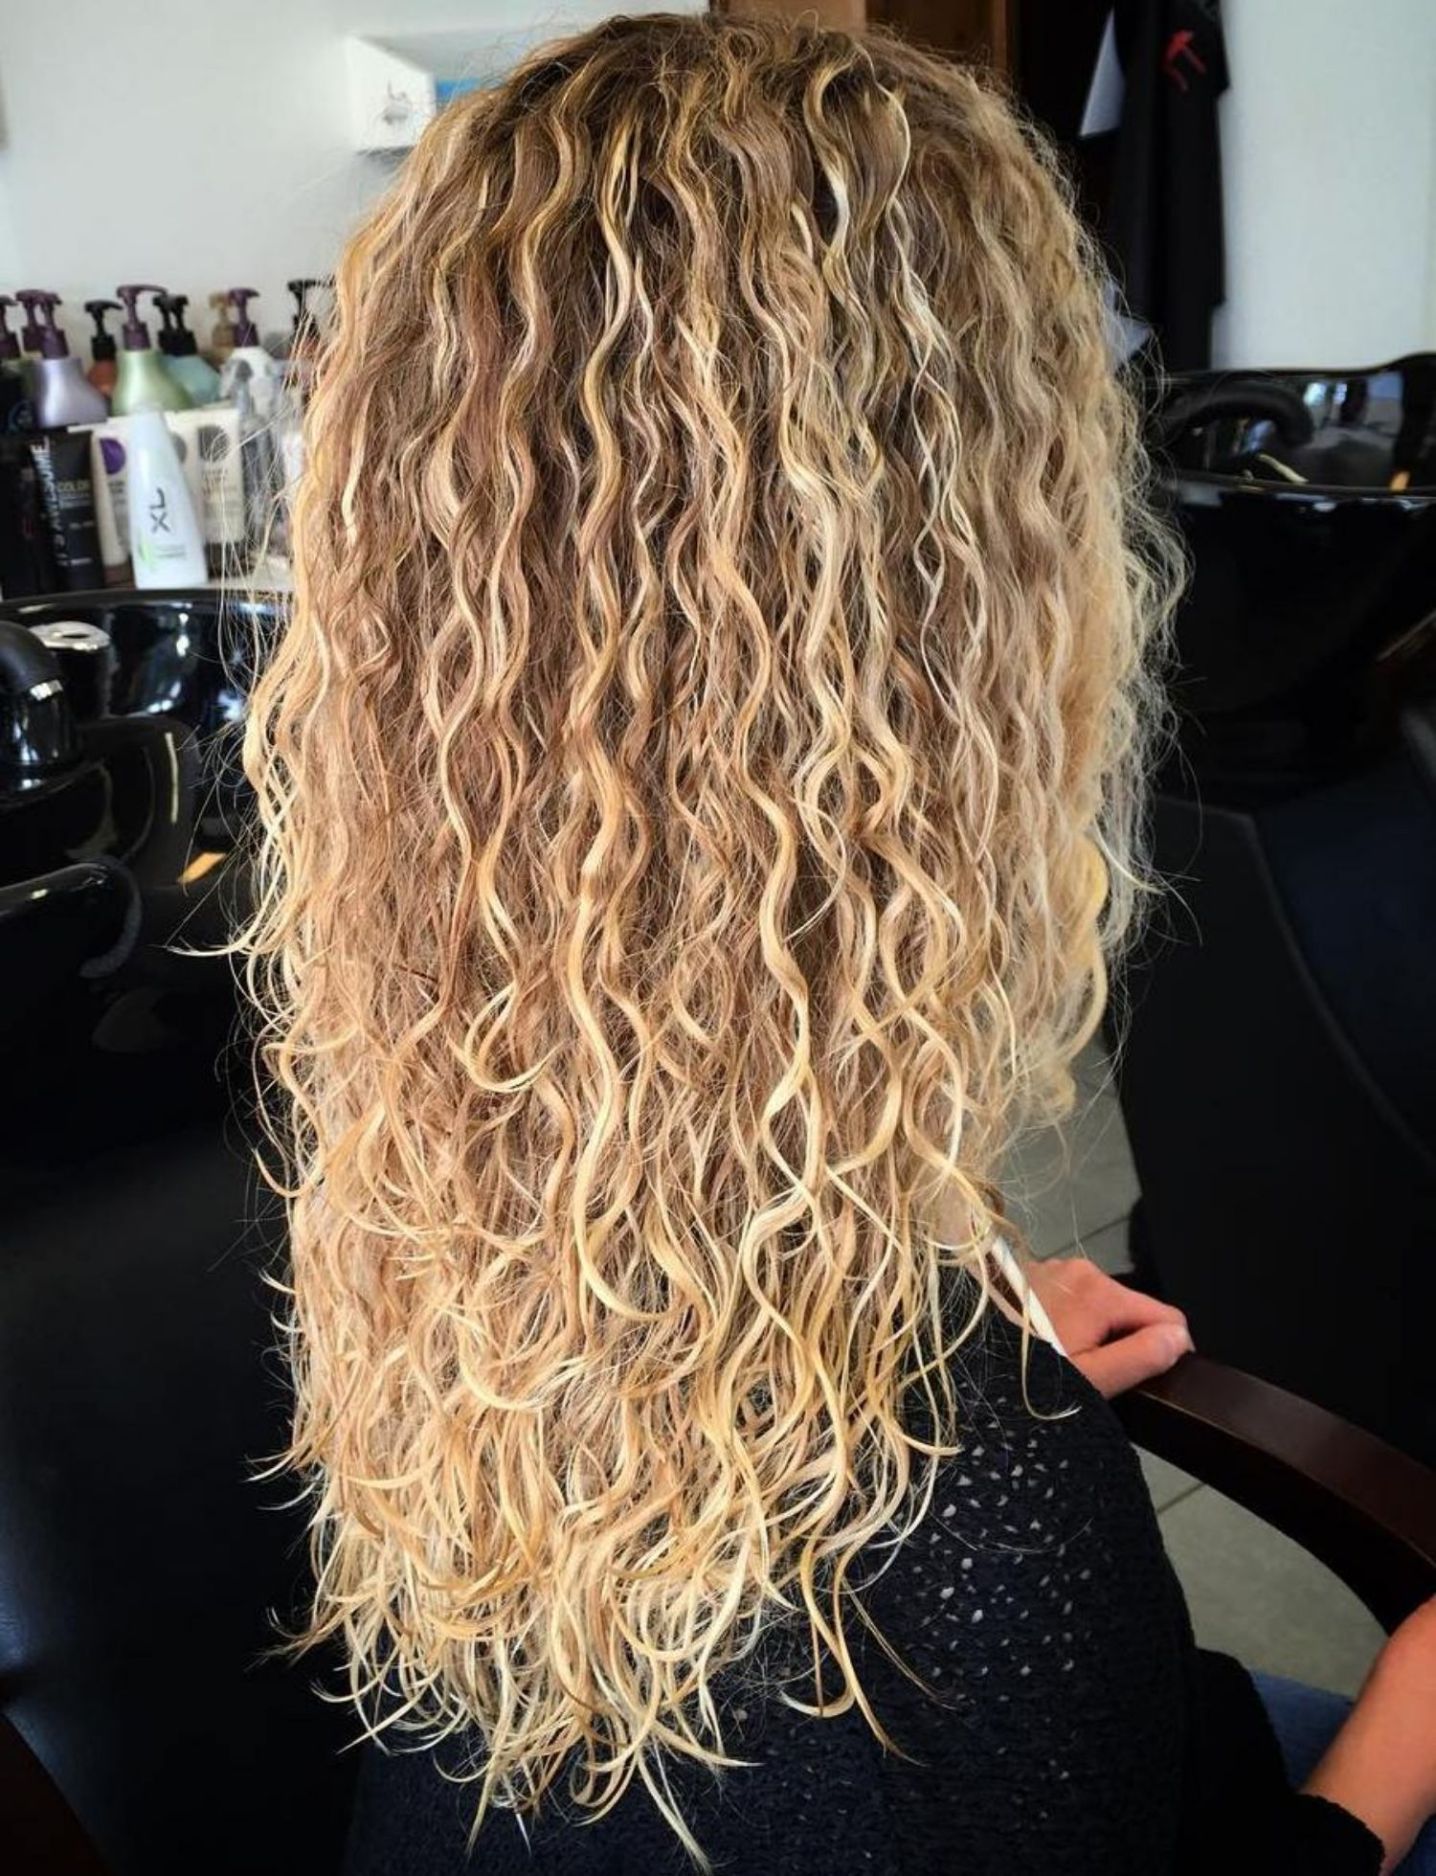 50 Gorgeous Perms Looks: Say Hello to Your Future Curls! -   16 long style waves
 ideas